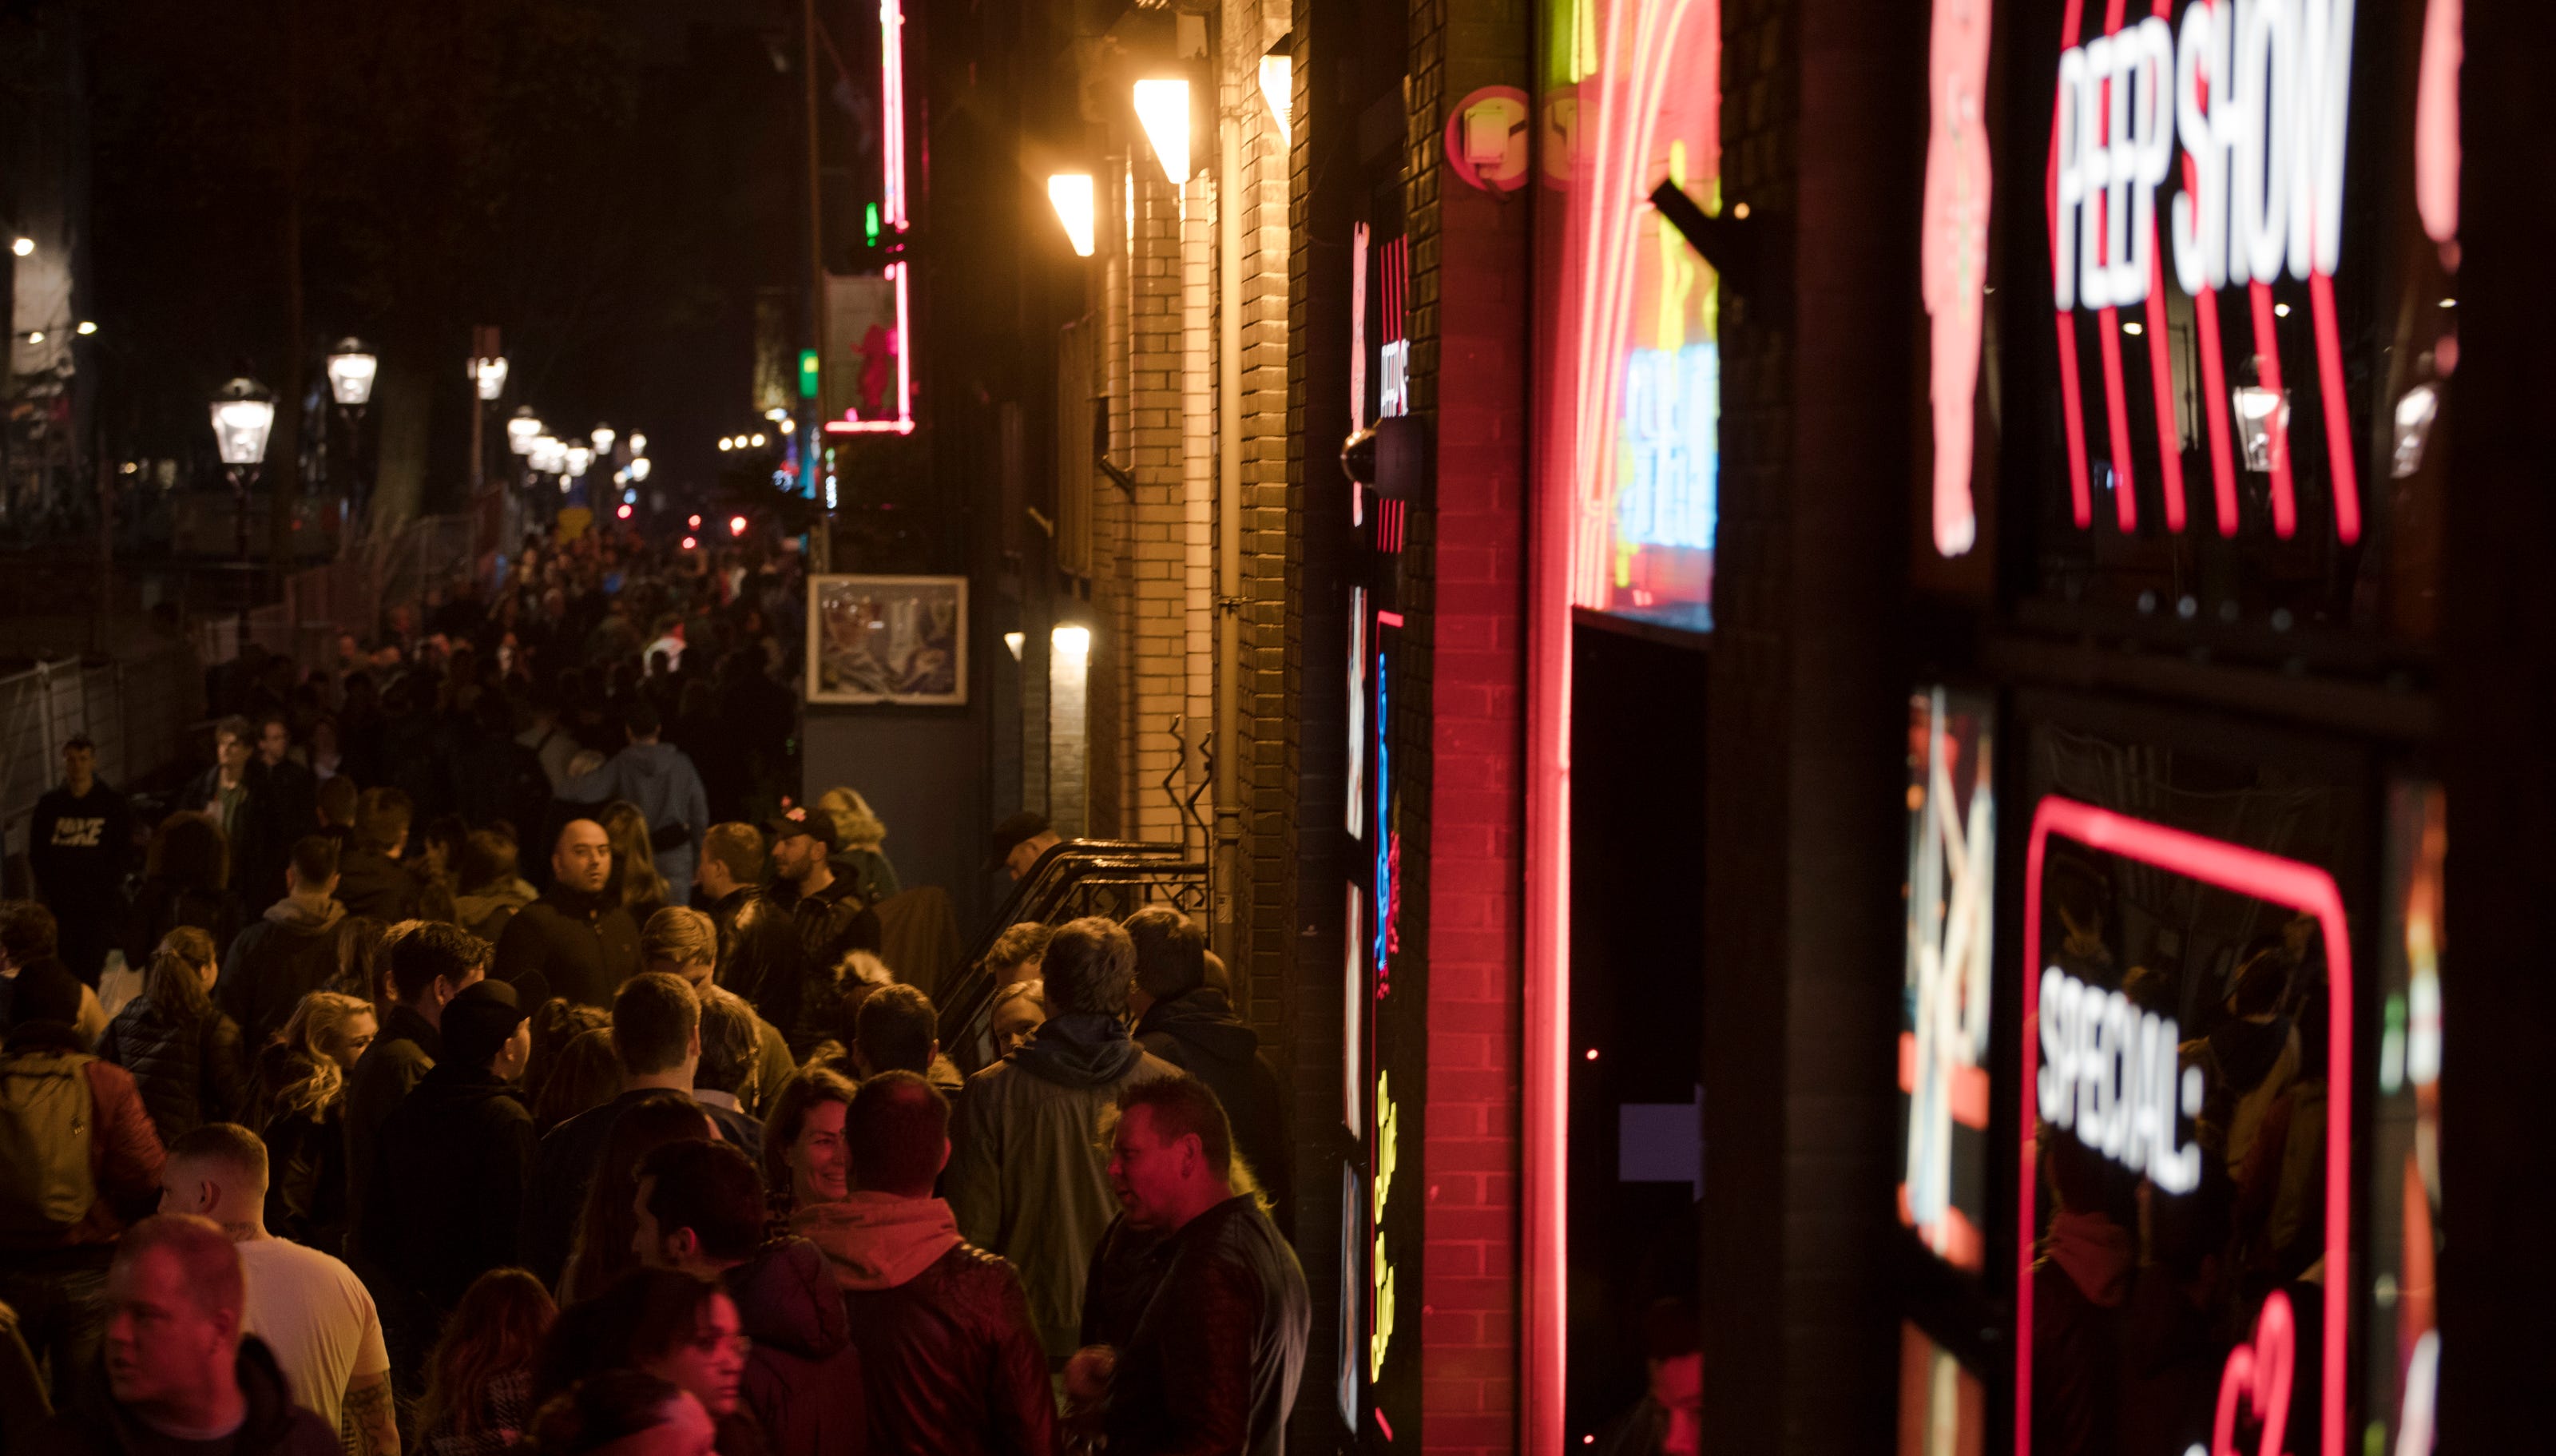 Amsterdam's red light district 'fundamental' changes